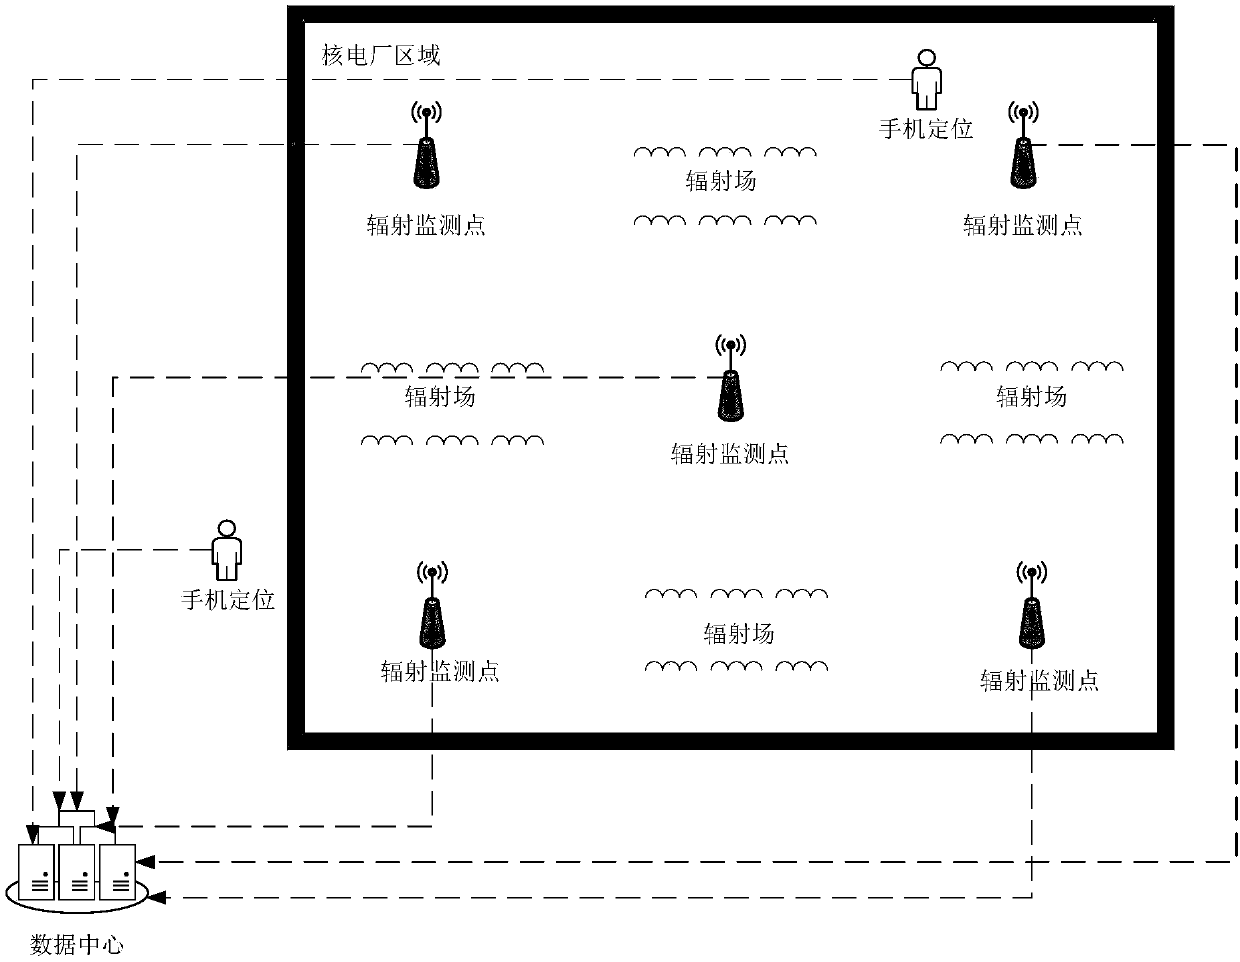 Nuclear power plant region emergency evacuation system based on mobile positioning and radiation monitoring data